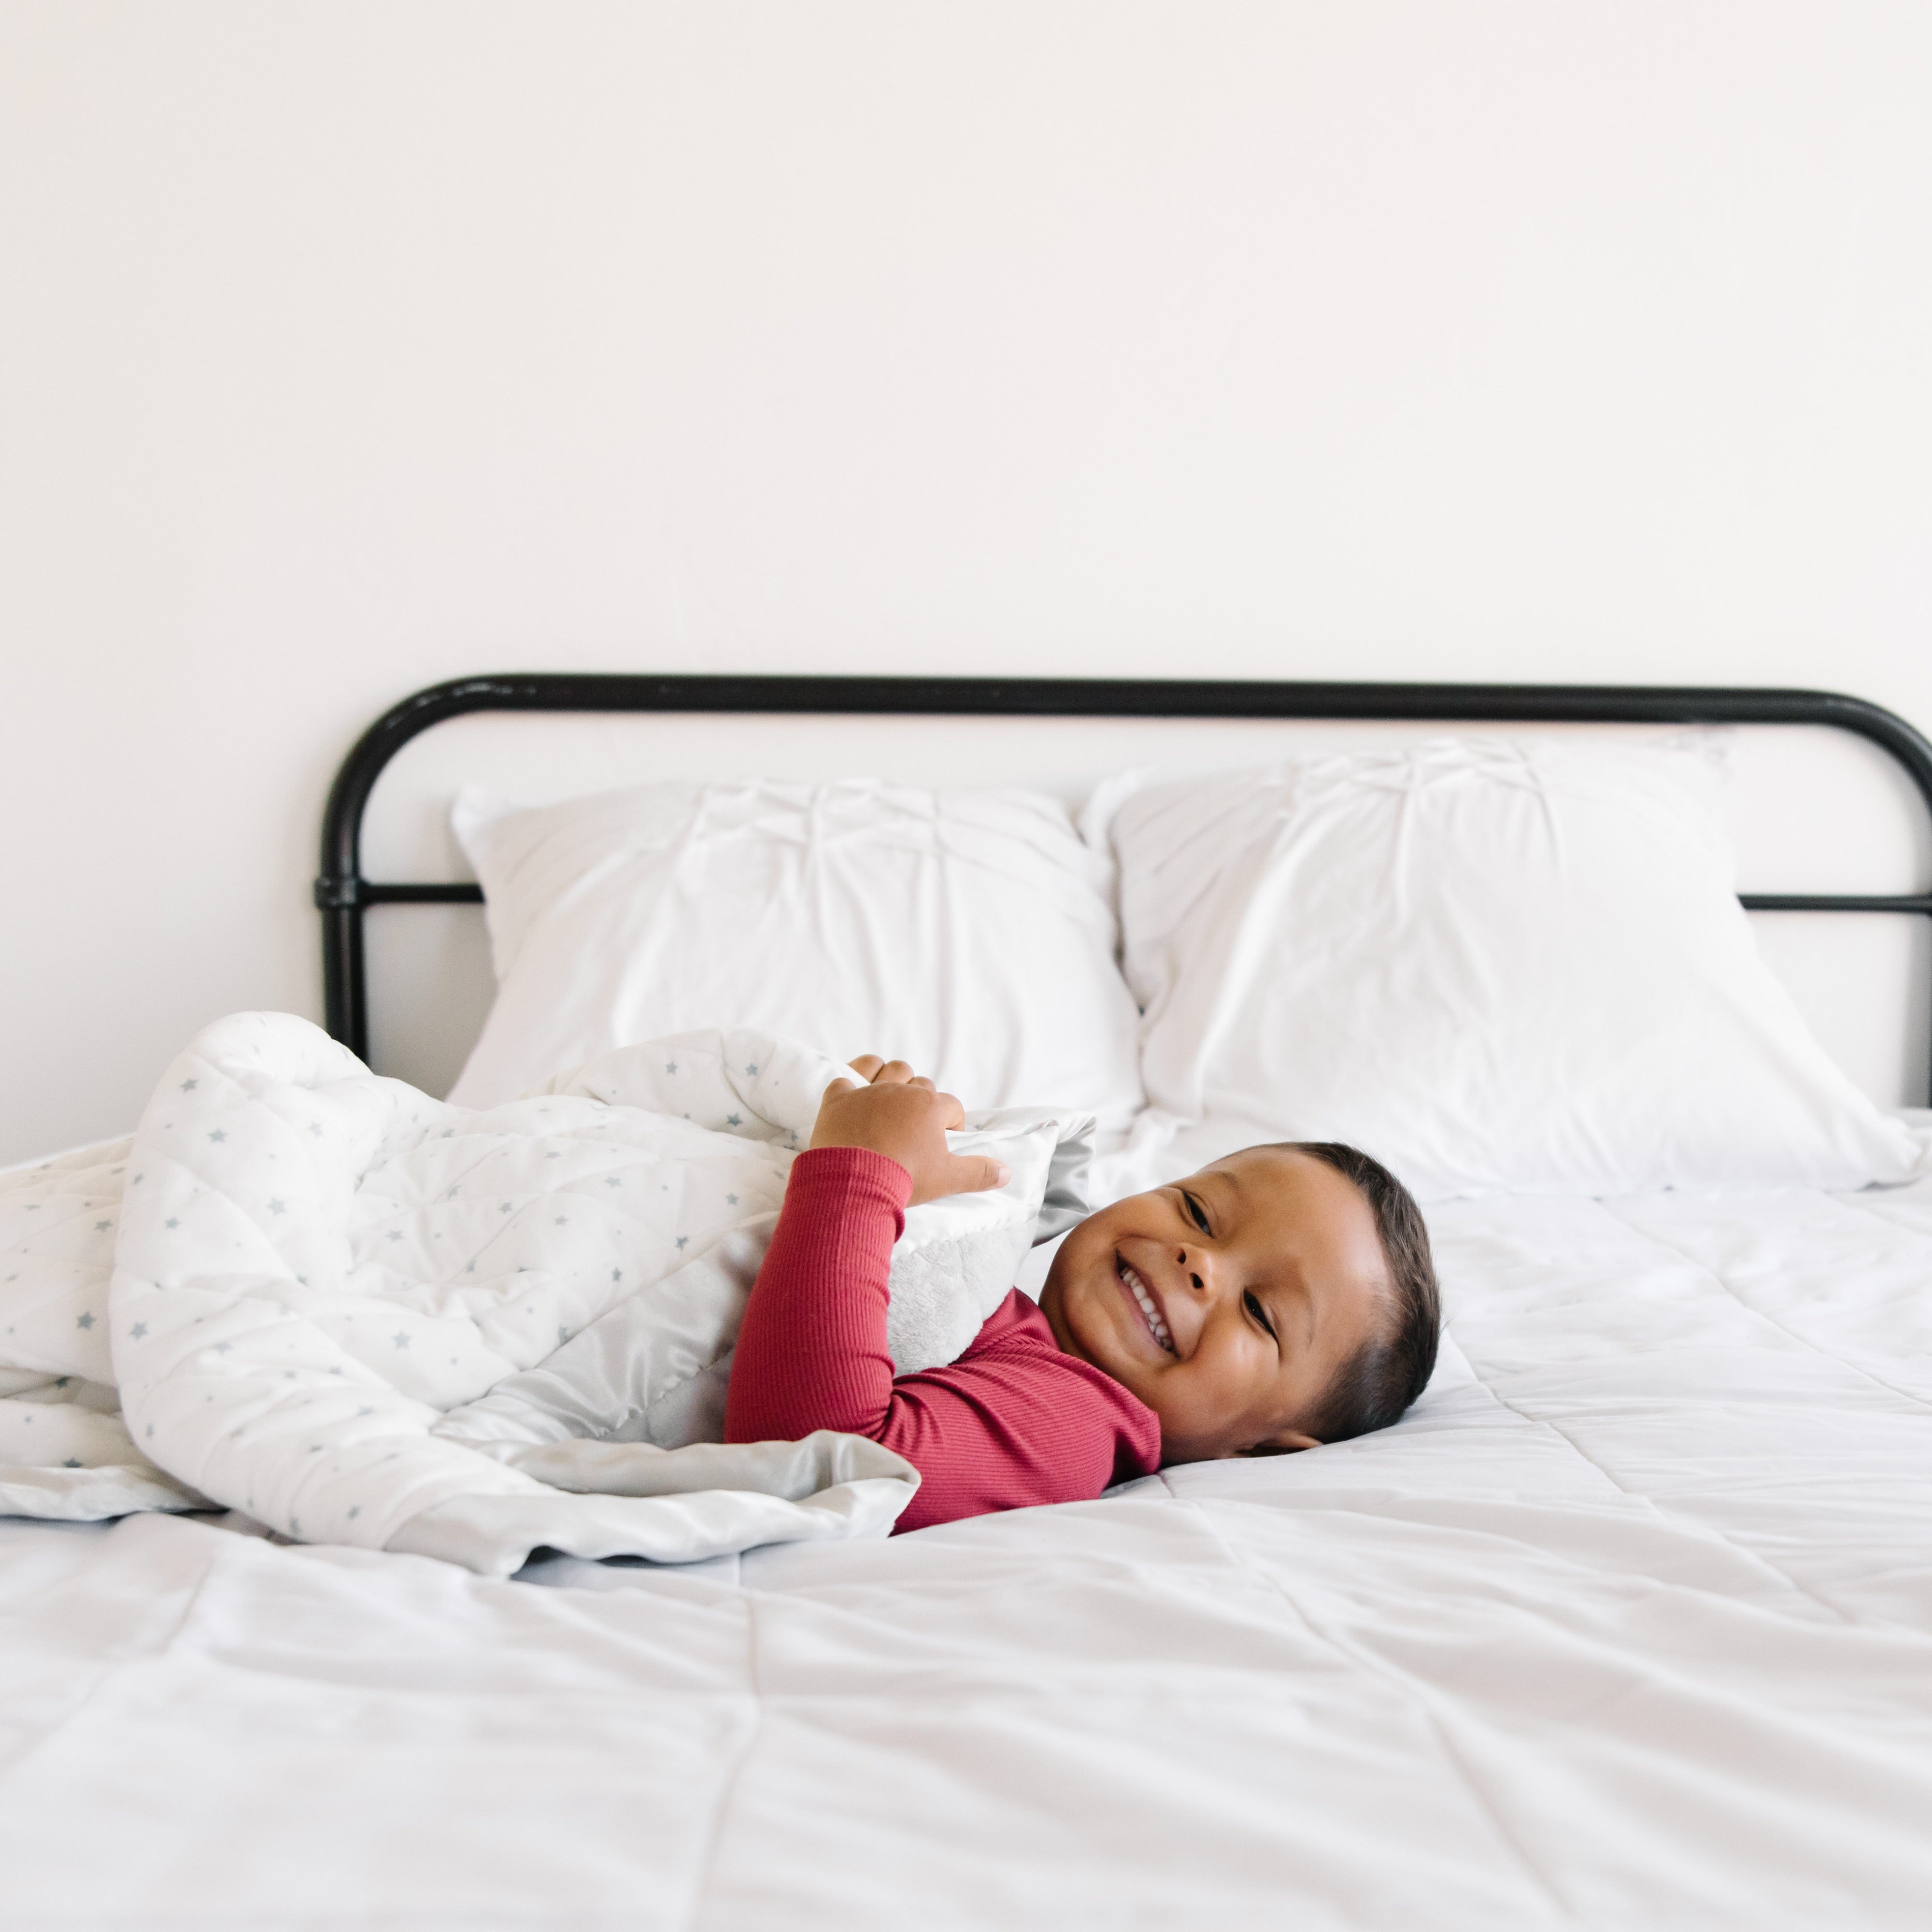 How Heavy Should a Weighted Blanket be for a Child?